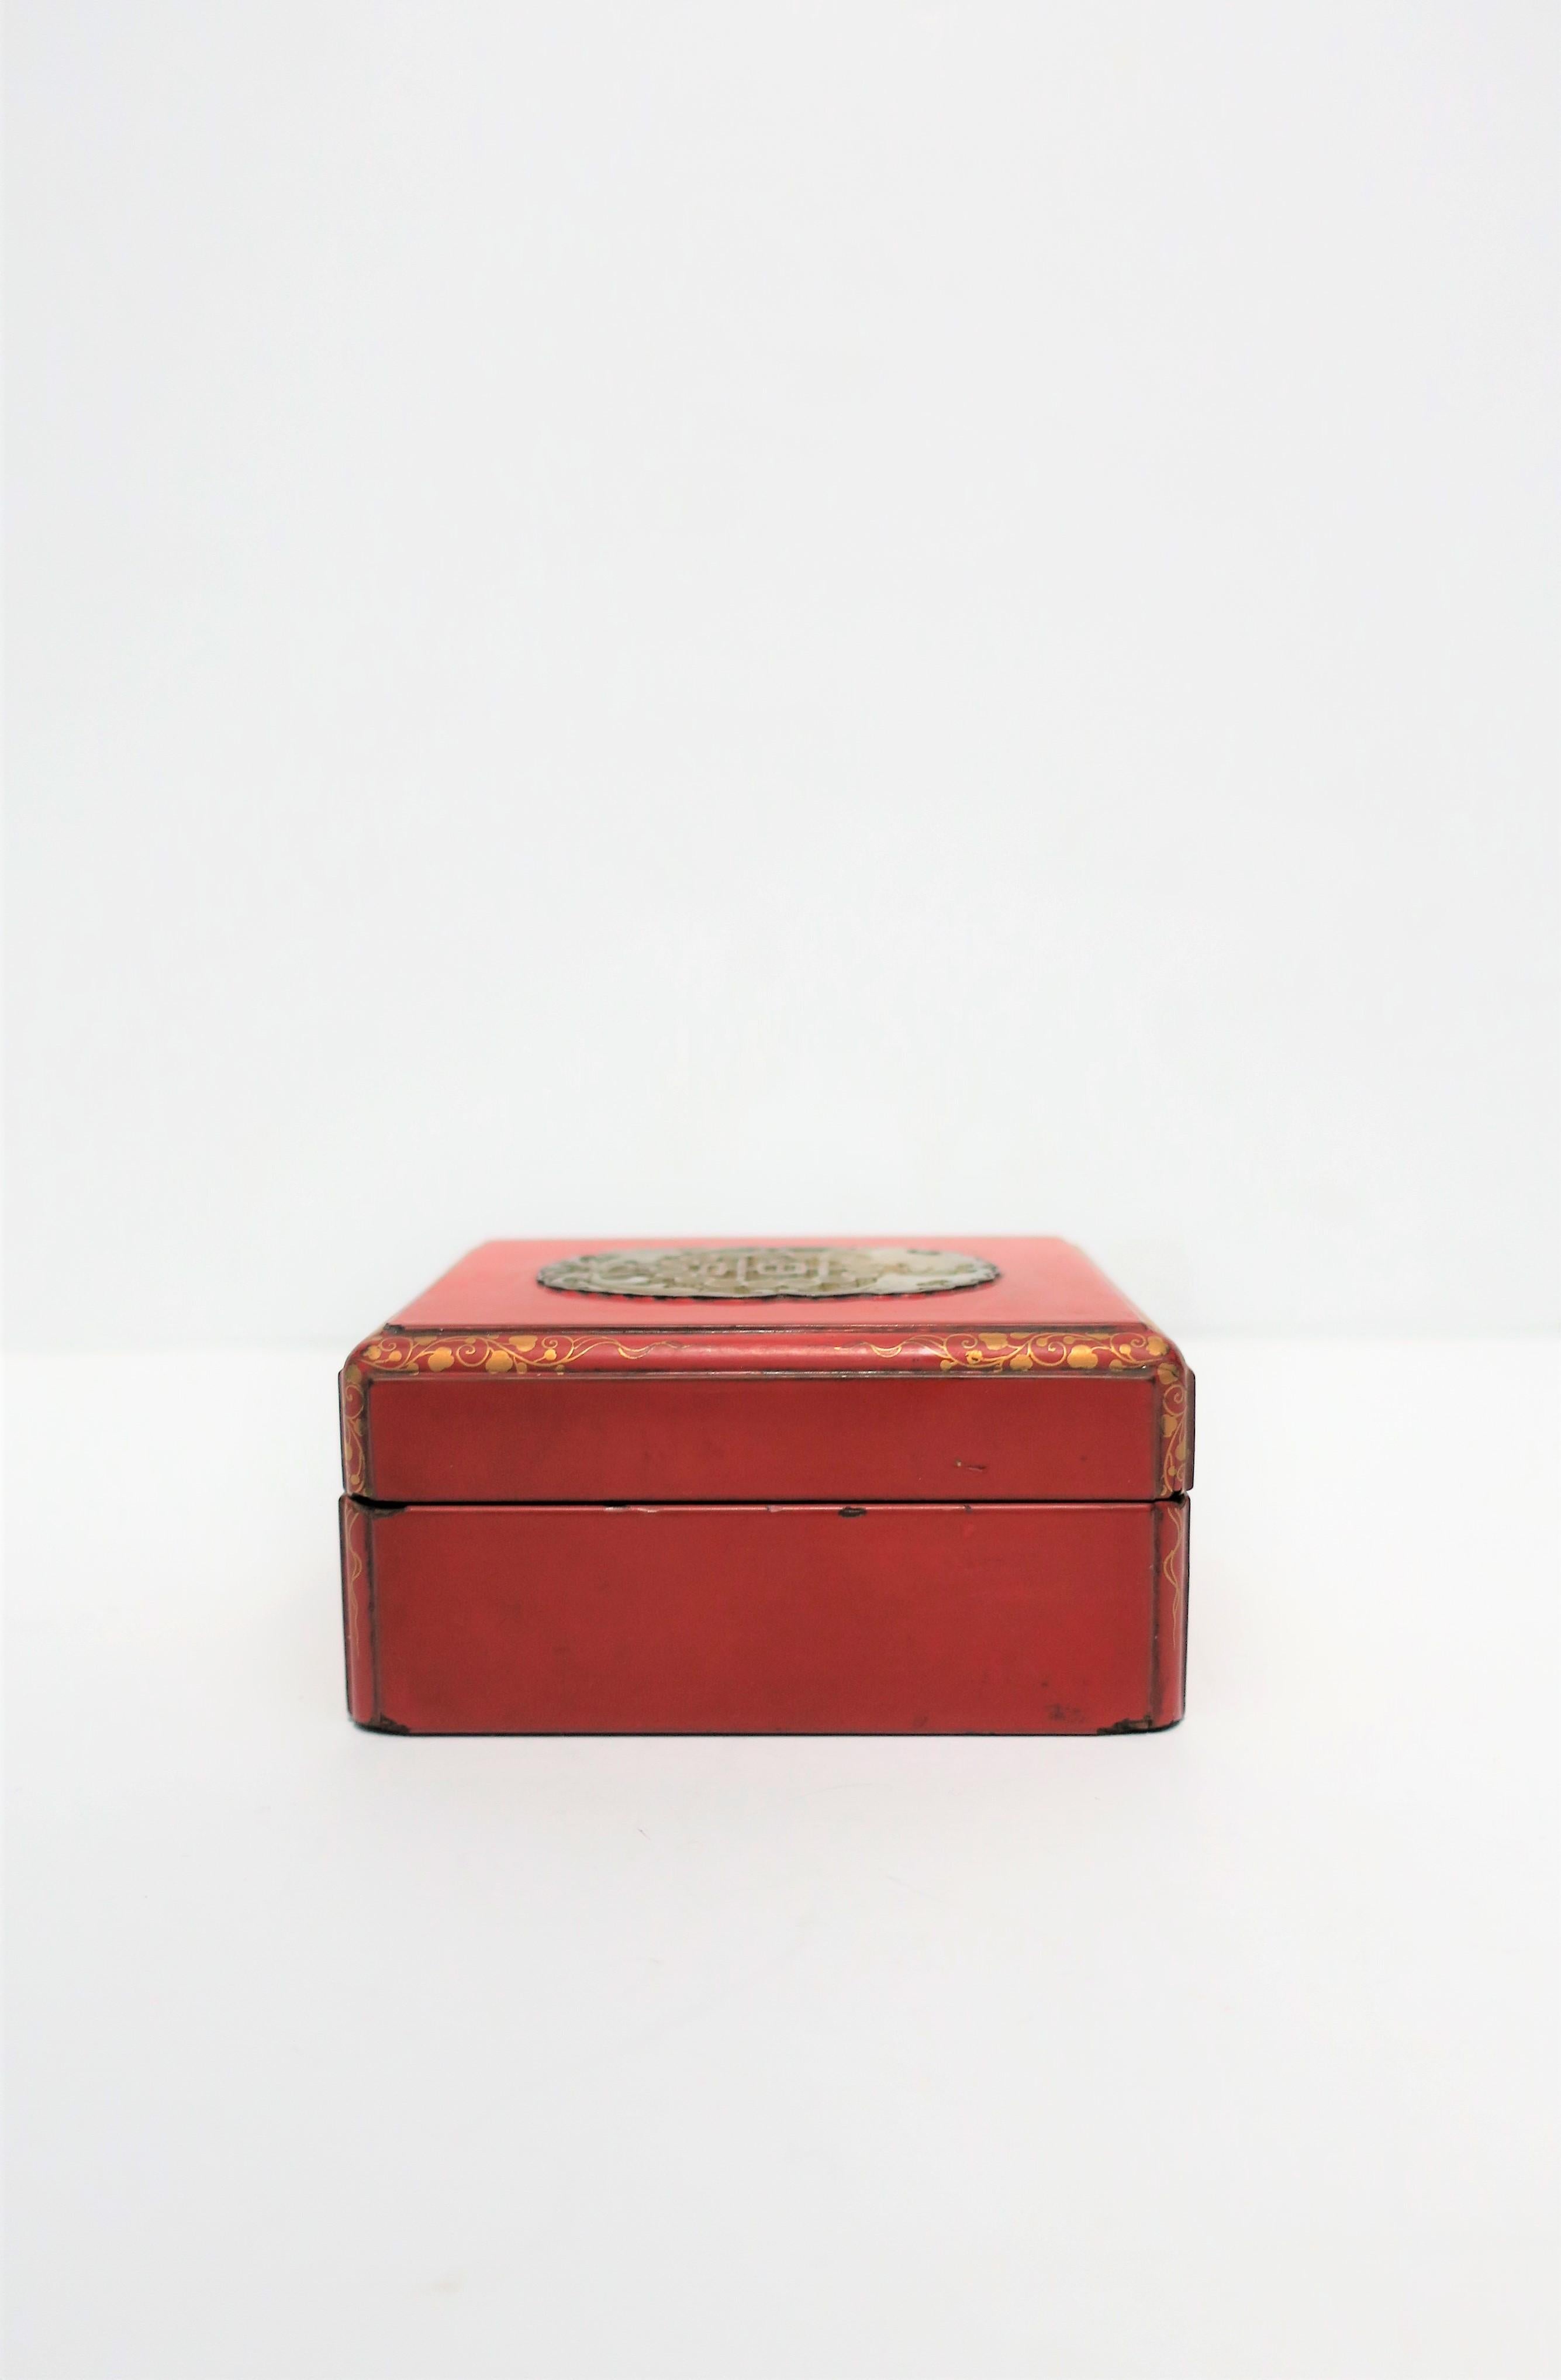 Asian Red Ox Blood Lacquer Box with Chinese White Jade Top 1